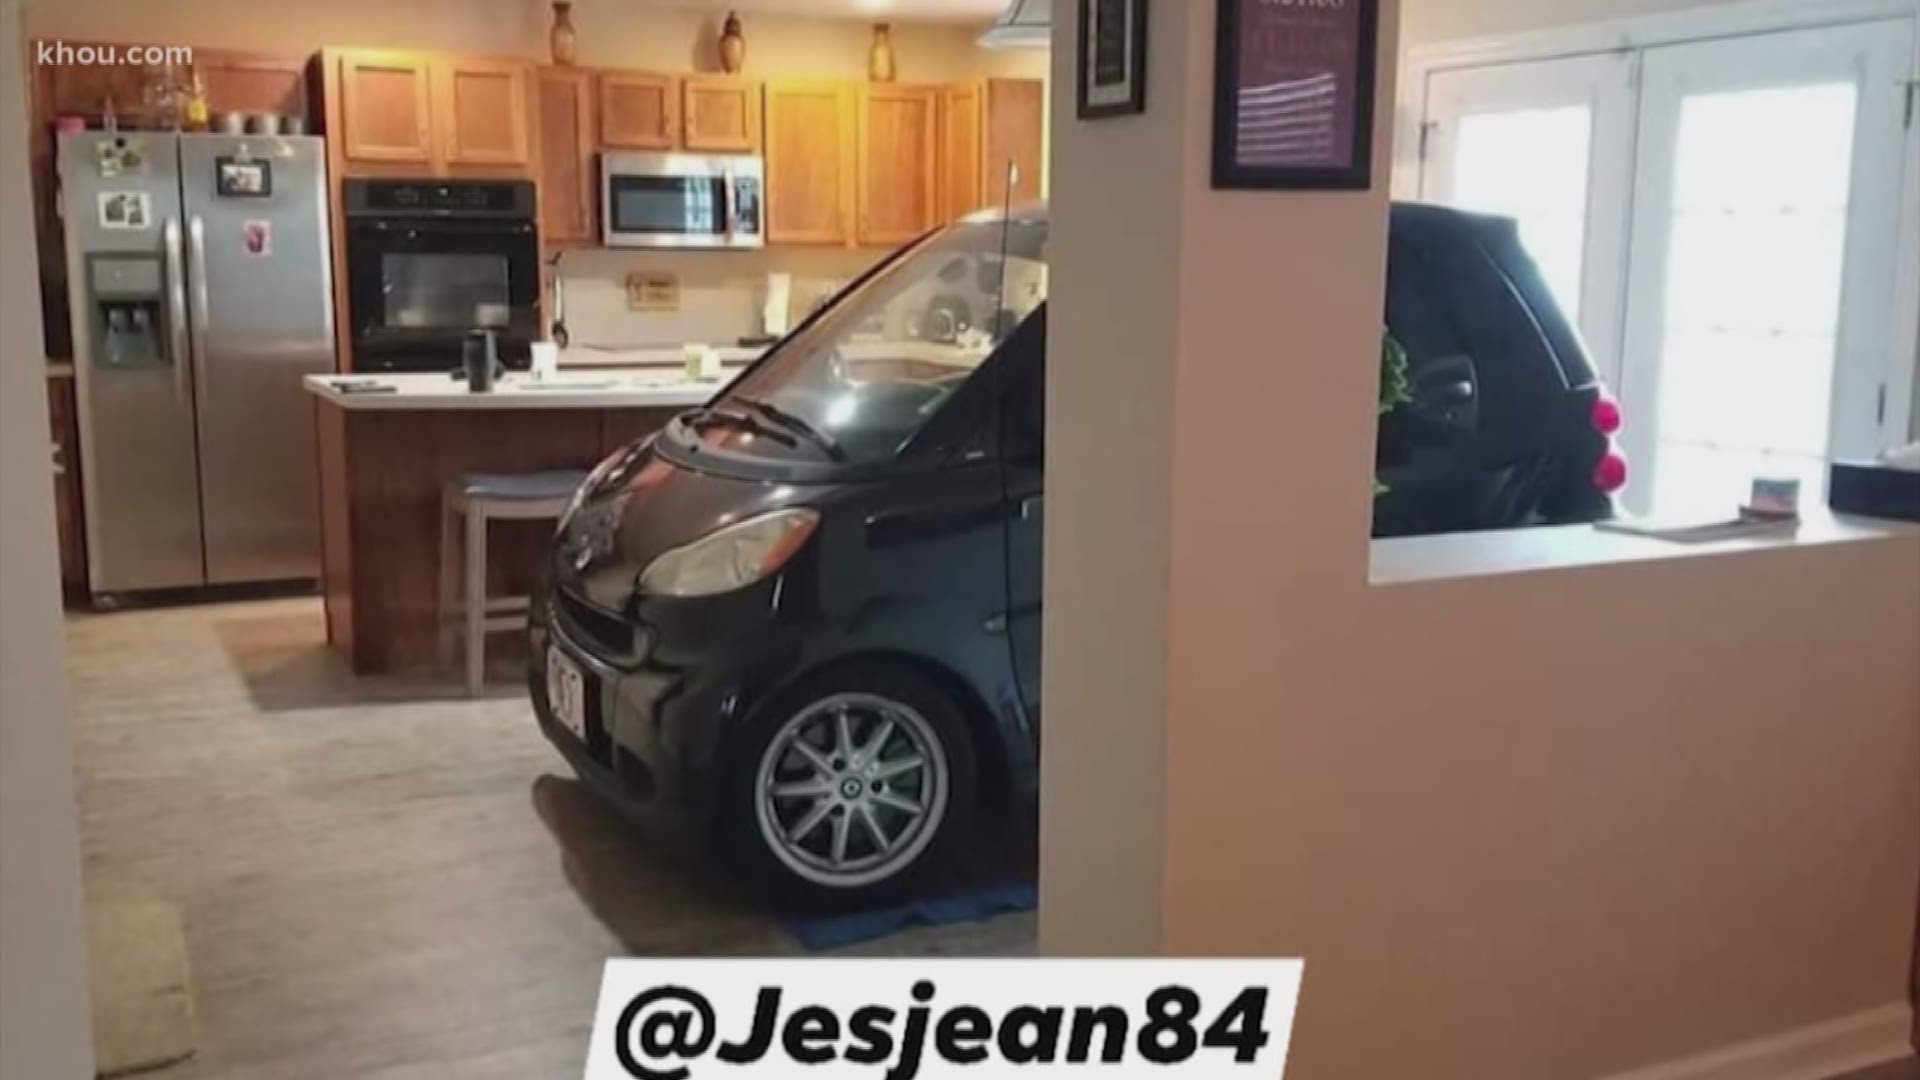 A guy in Florida really wanted to protect his smart car from Hurricane Dorian so he parked it in the kitchen!